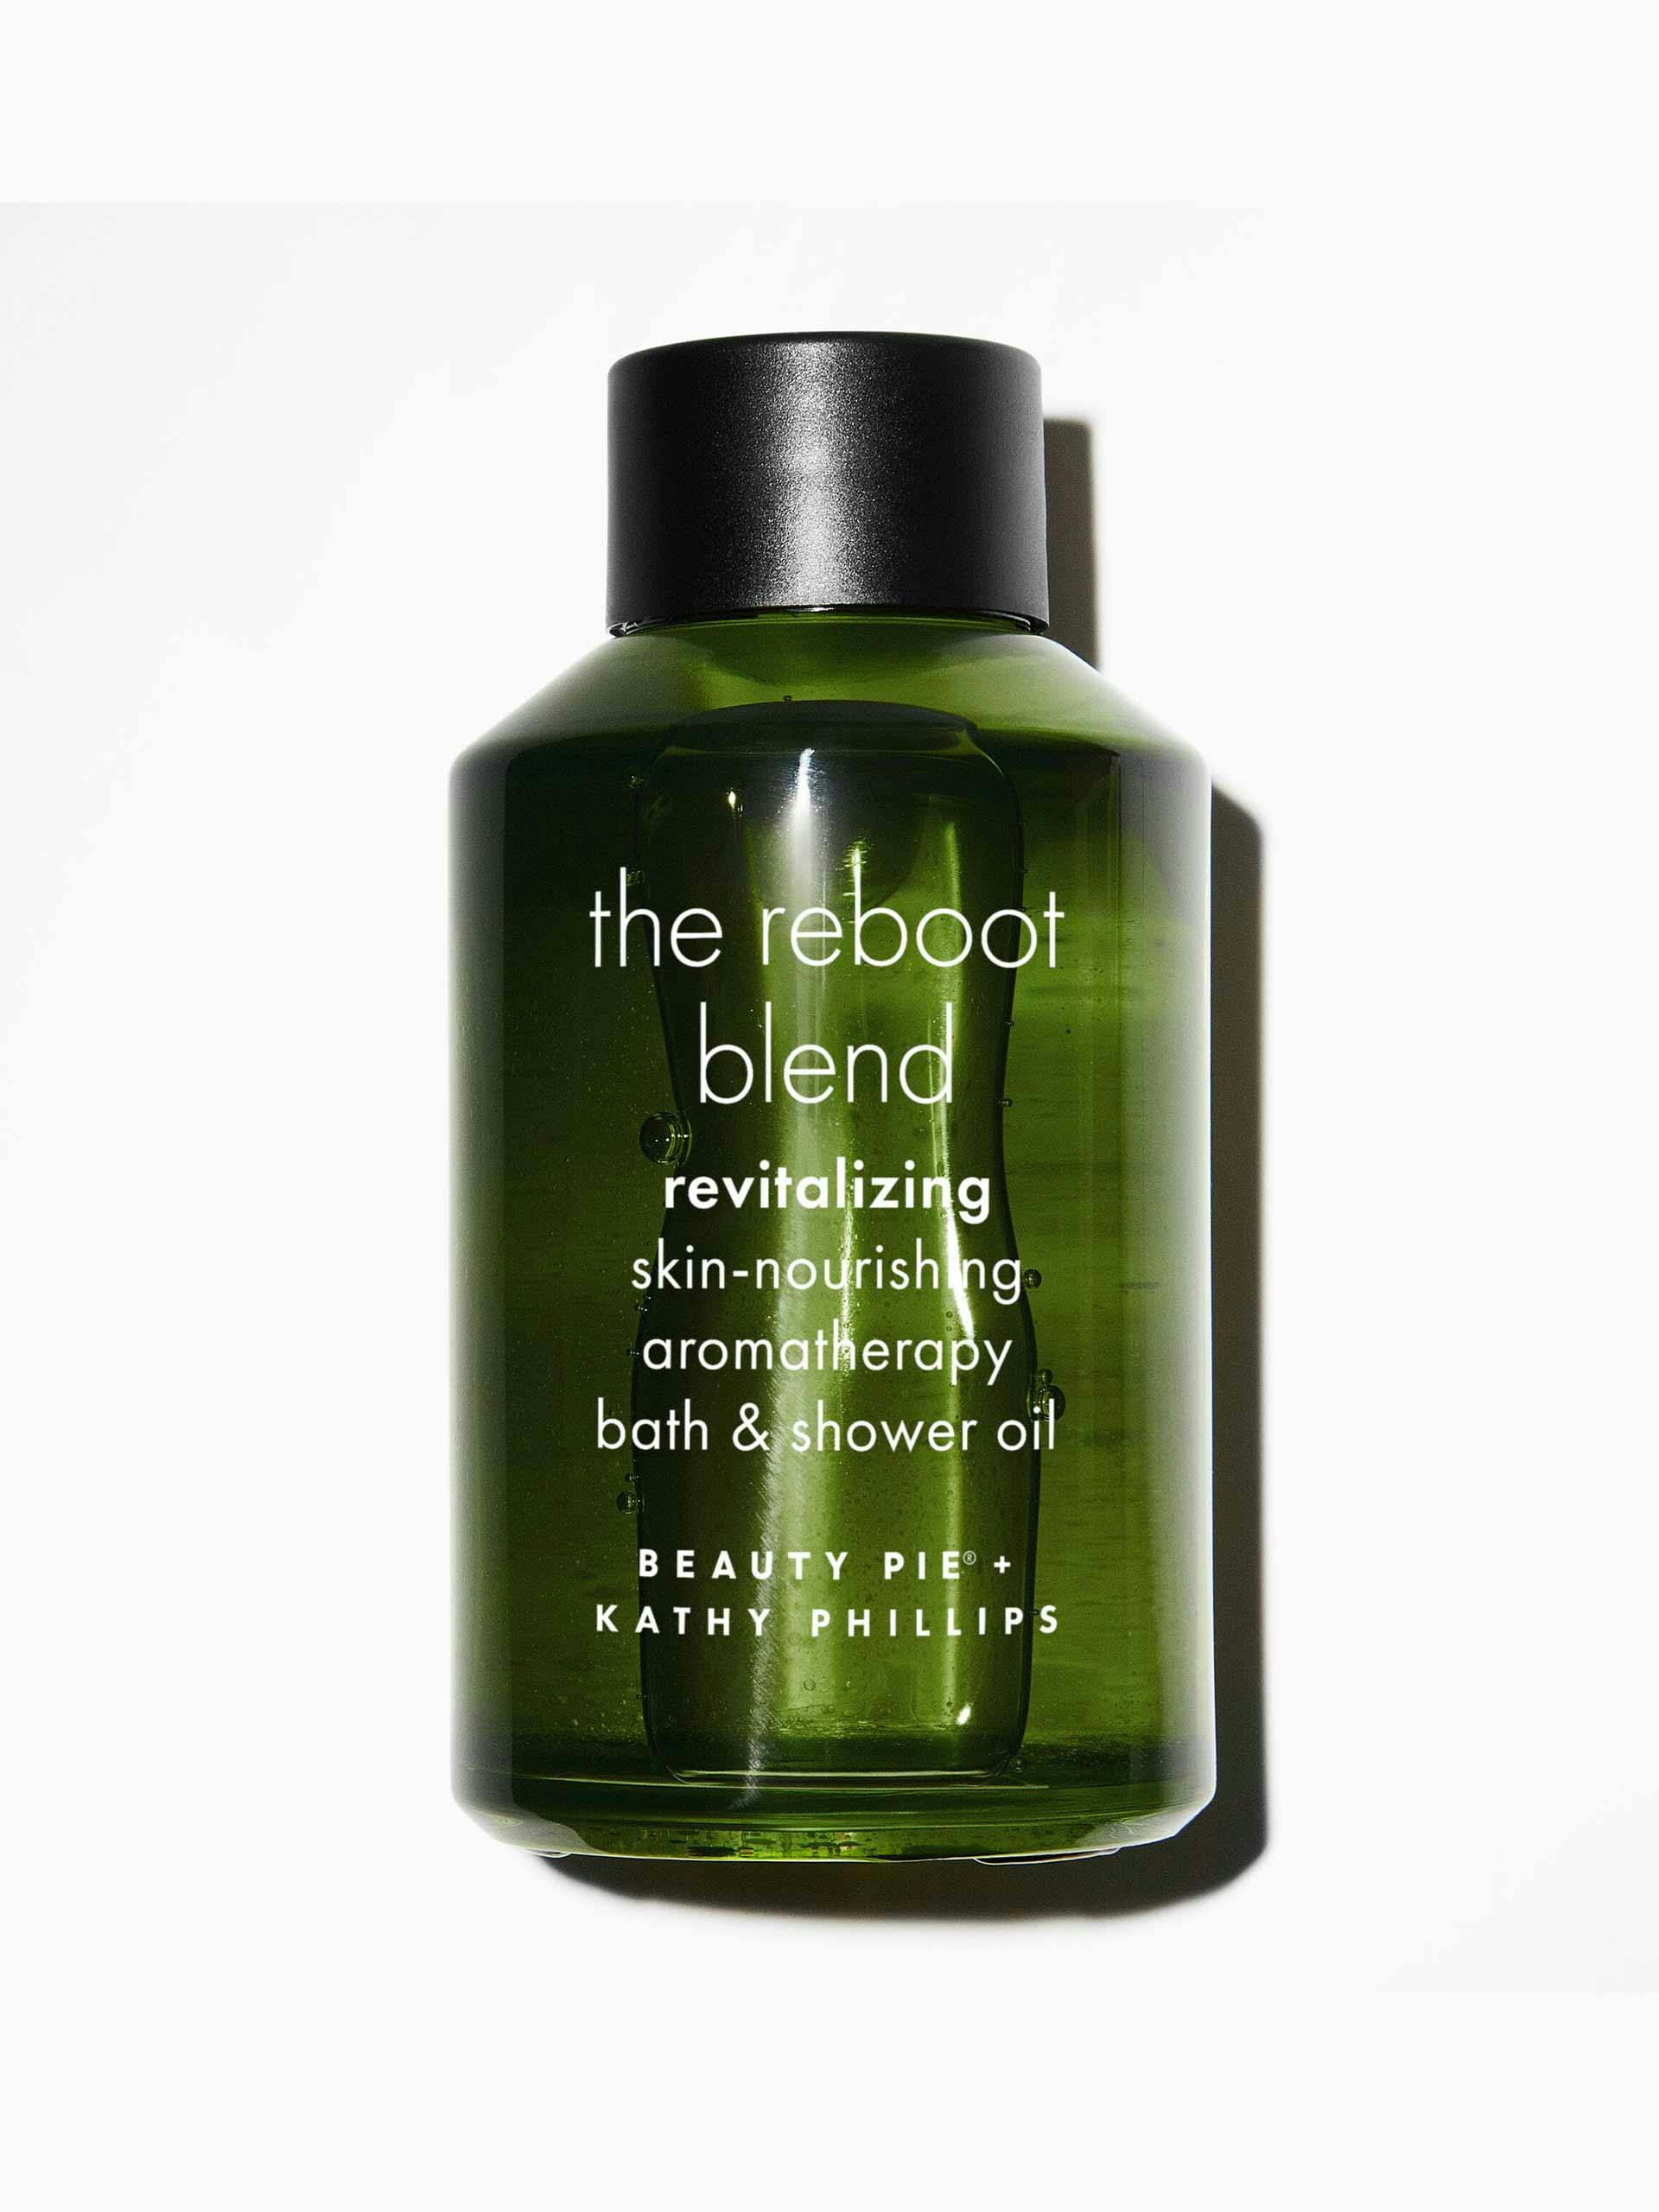 The Reboot Blend body and bath oil